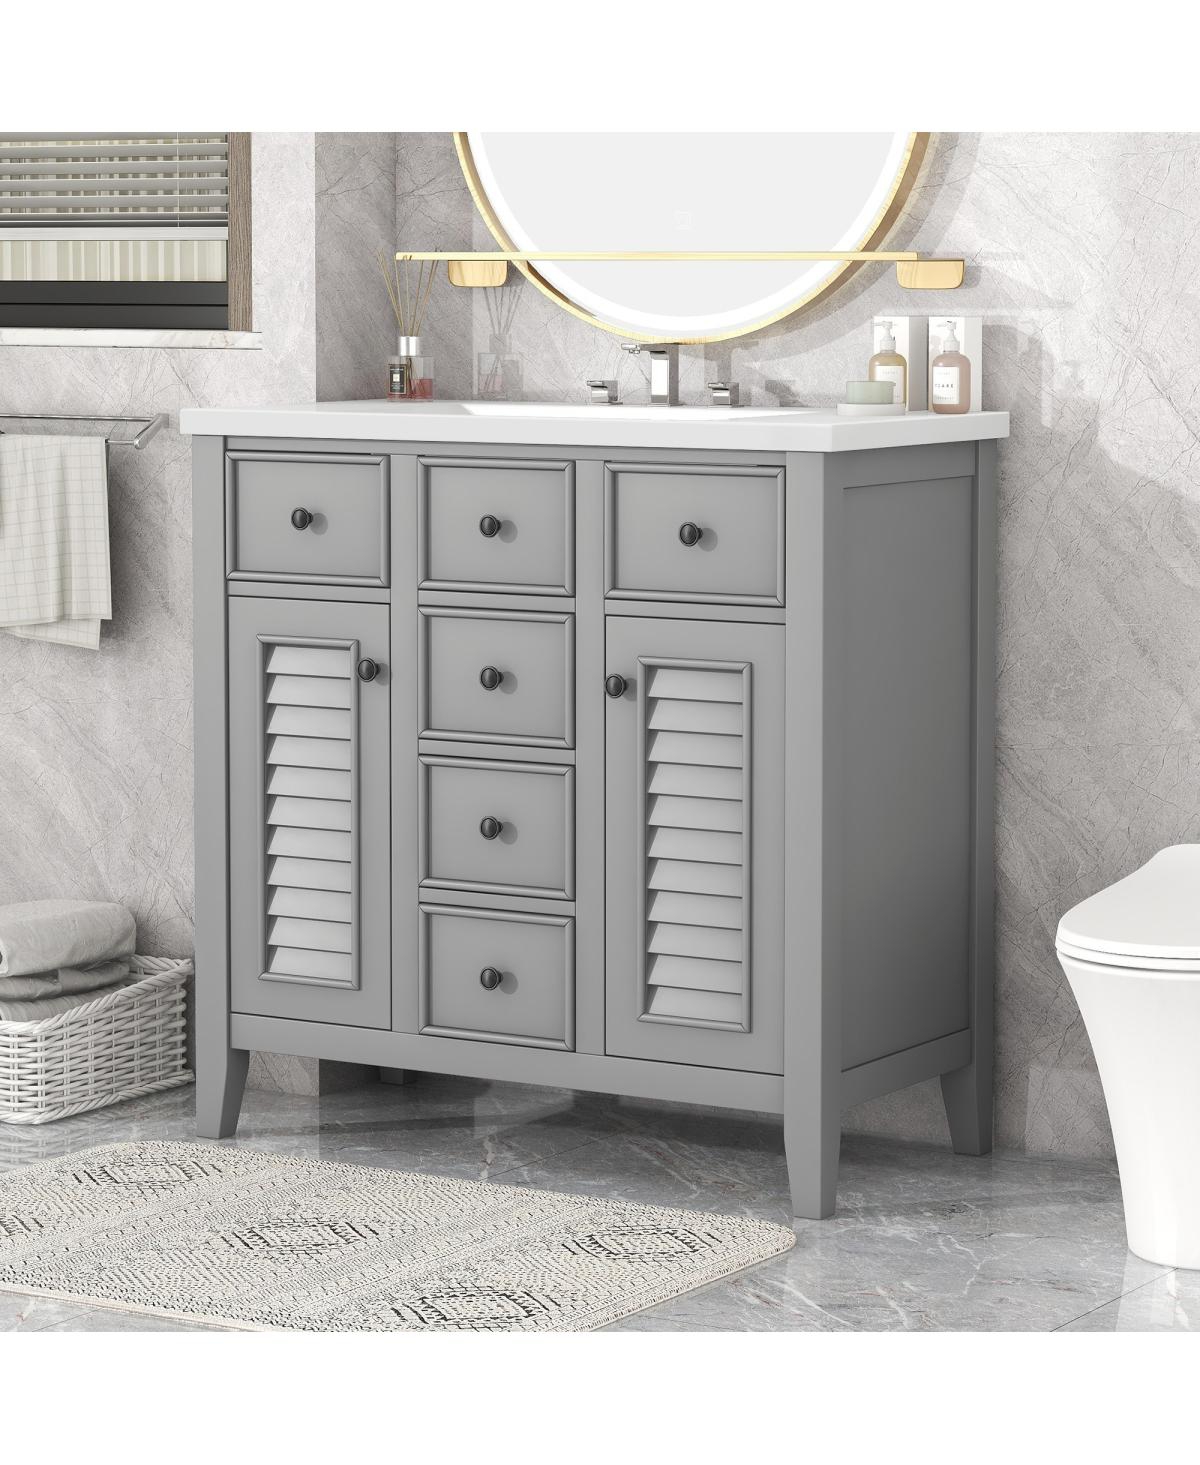 36" Bathroom Vanity With Ceramic Basin, Two Cabinets And Five Drawers, Solid Wood Frame - Grey